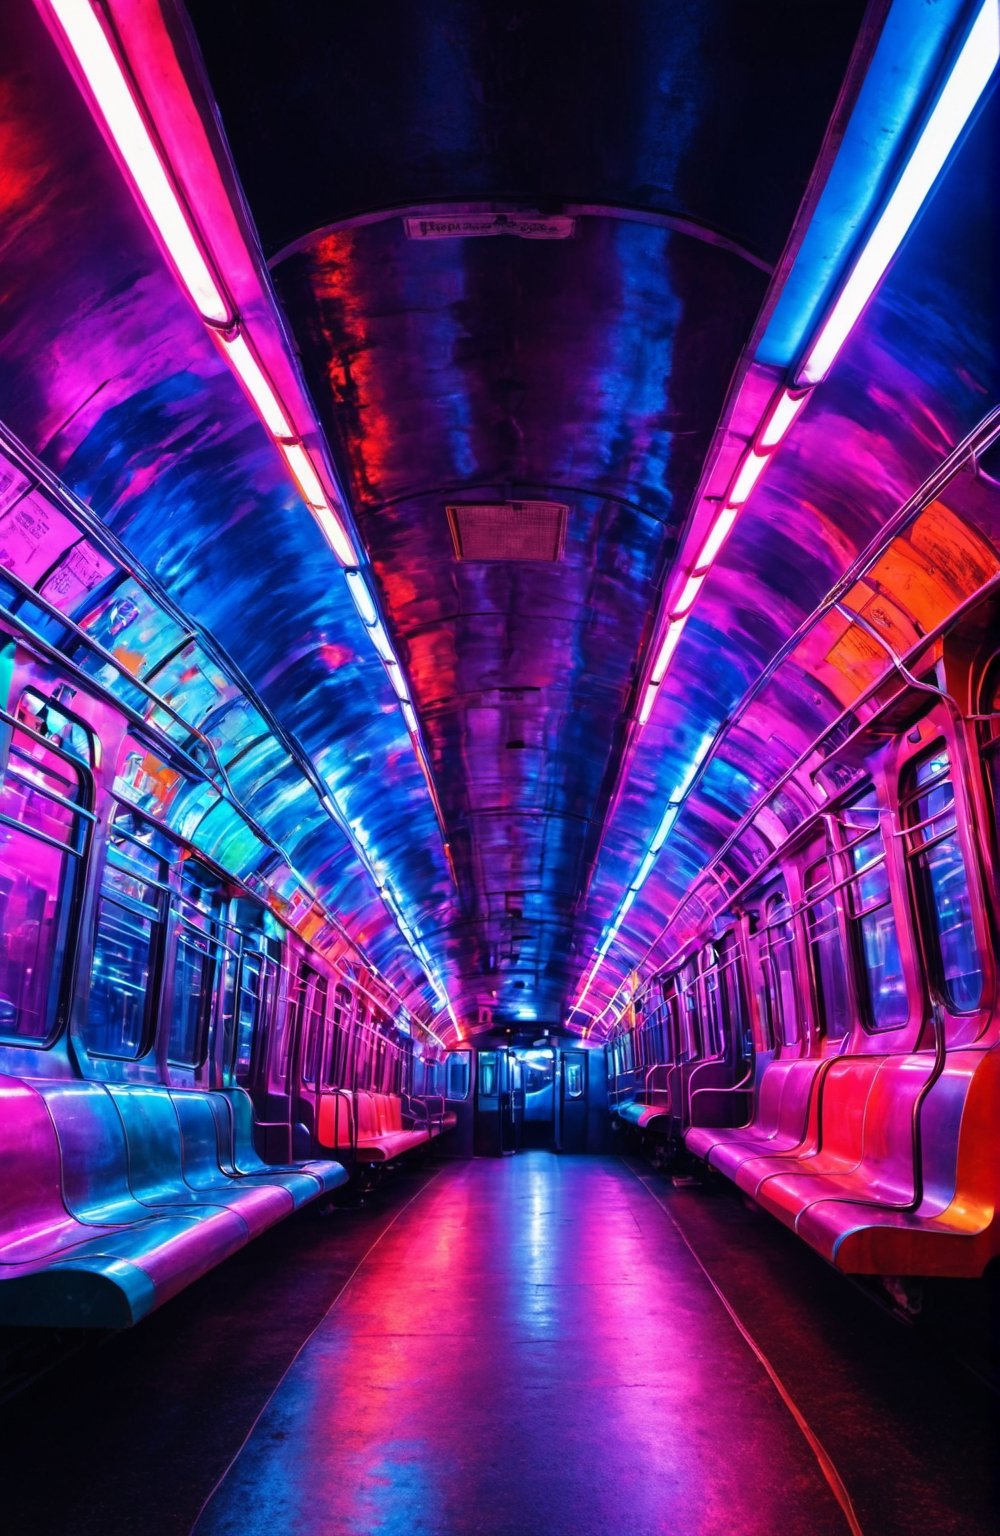 Underground train, all around full of colored lights, dreamy atmosphere, contrast, style raw.,night city